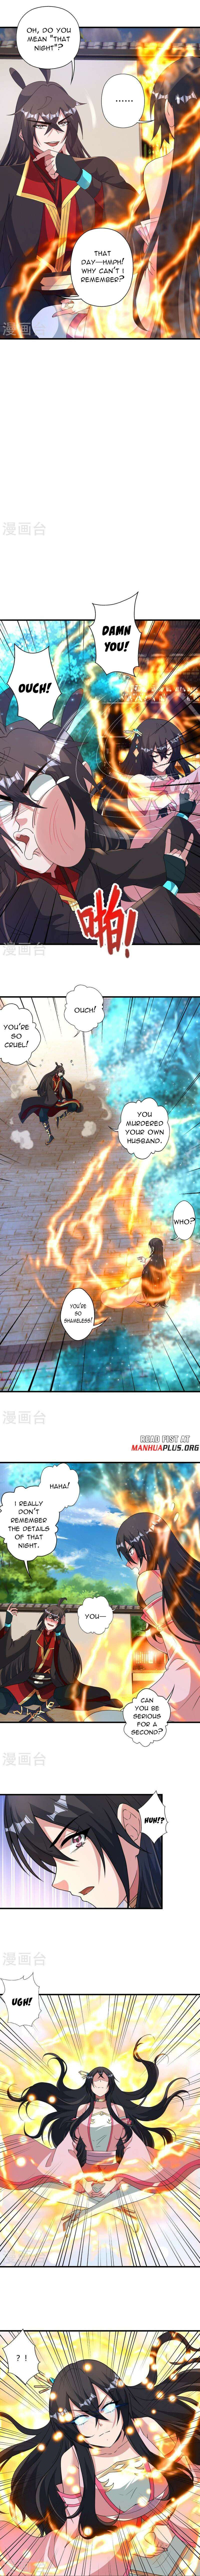 Banished Disciple's Counterattack Chapter 455 page 7